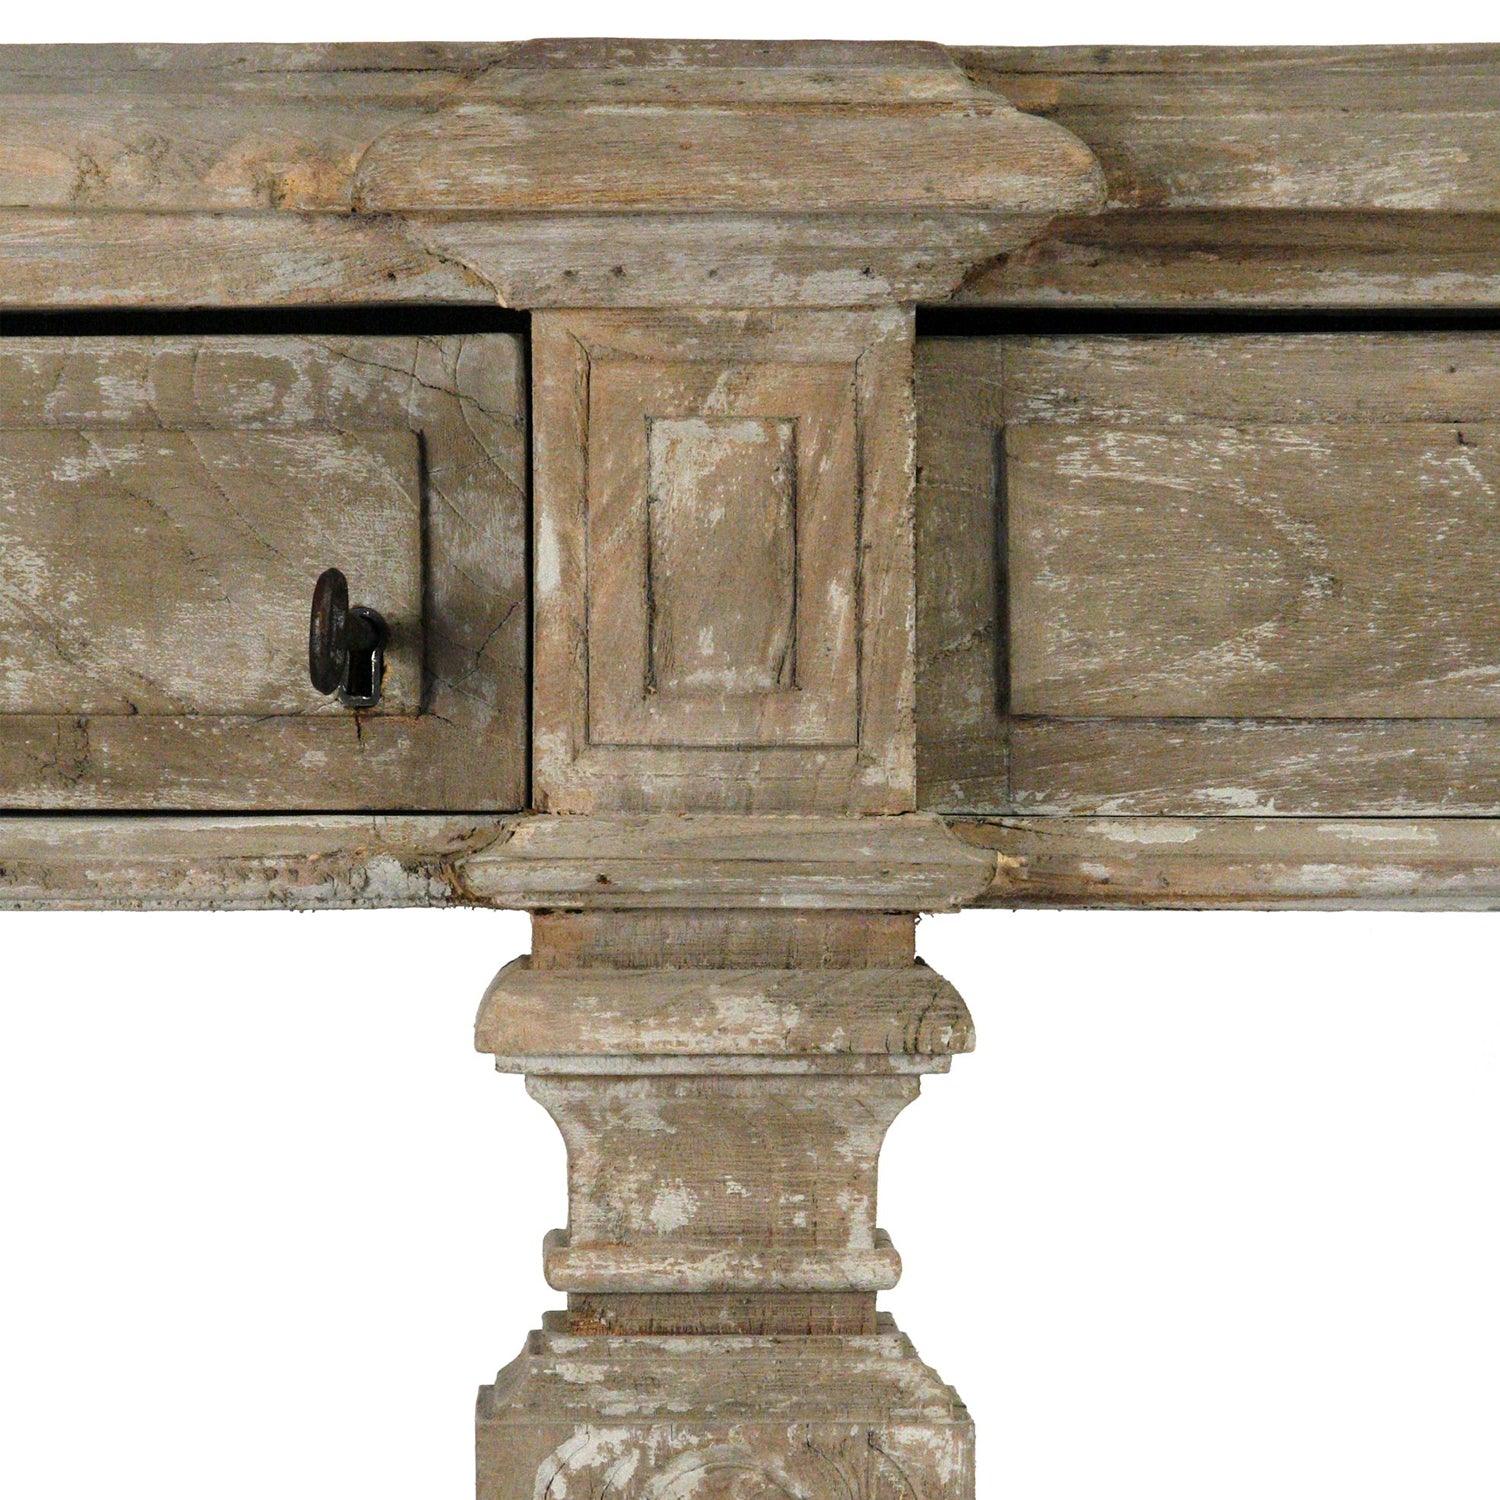 Distressed Rockford French Console - Belle Escape